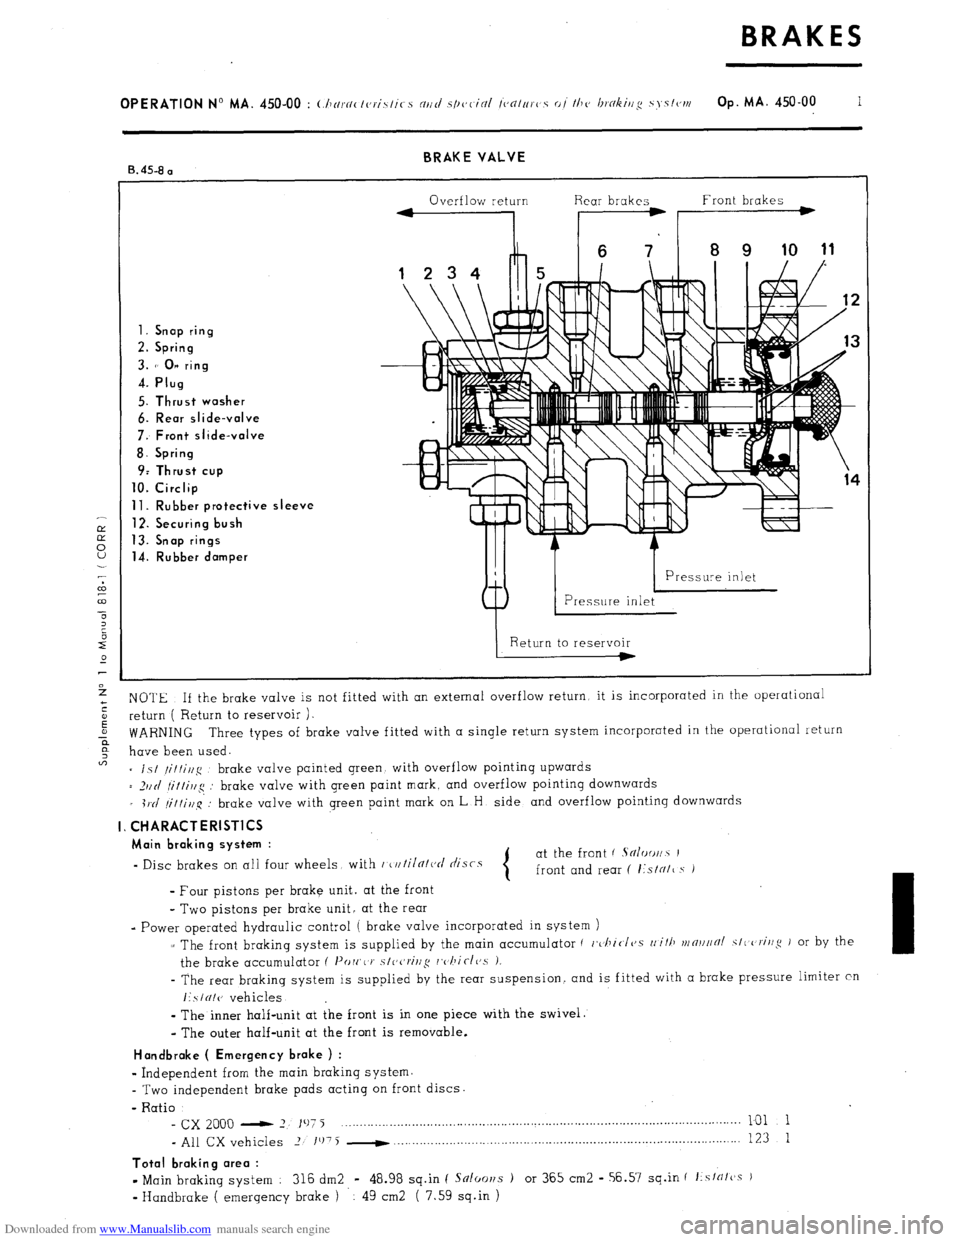 Citroen CX 1977 1.G Workshop Manual Downloaded from www.Manualslib.com manuals search engine BRAKE VALVE 
B. 45-8 a 
Overflow return Rear brakes Front brakes 
1. Snap ring 
2. Spring 
3. 1’ 0” ring 
4. Plug 
5. Thrust washer 
6. Rea